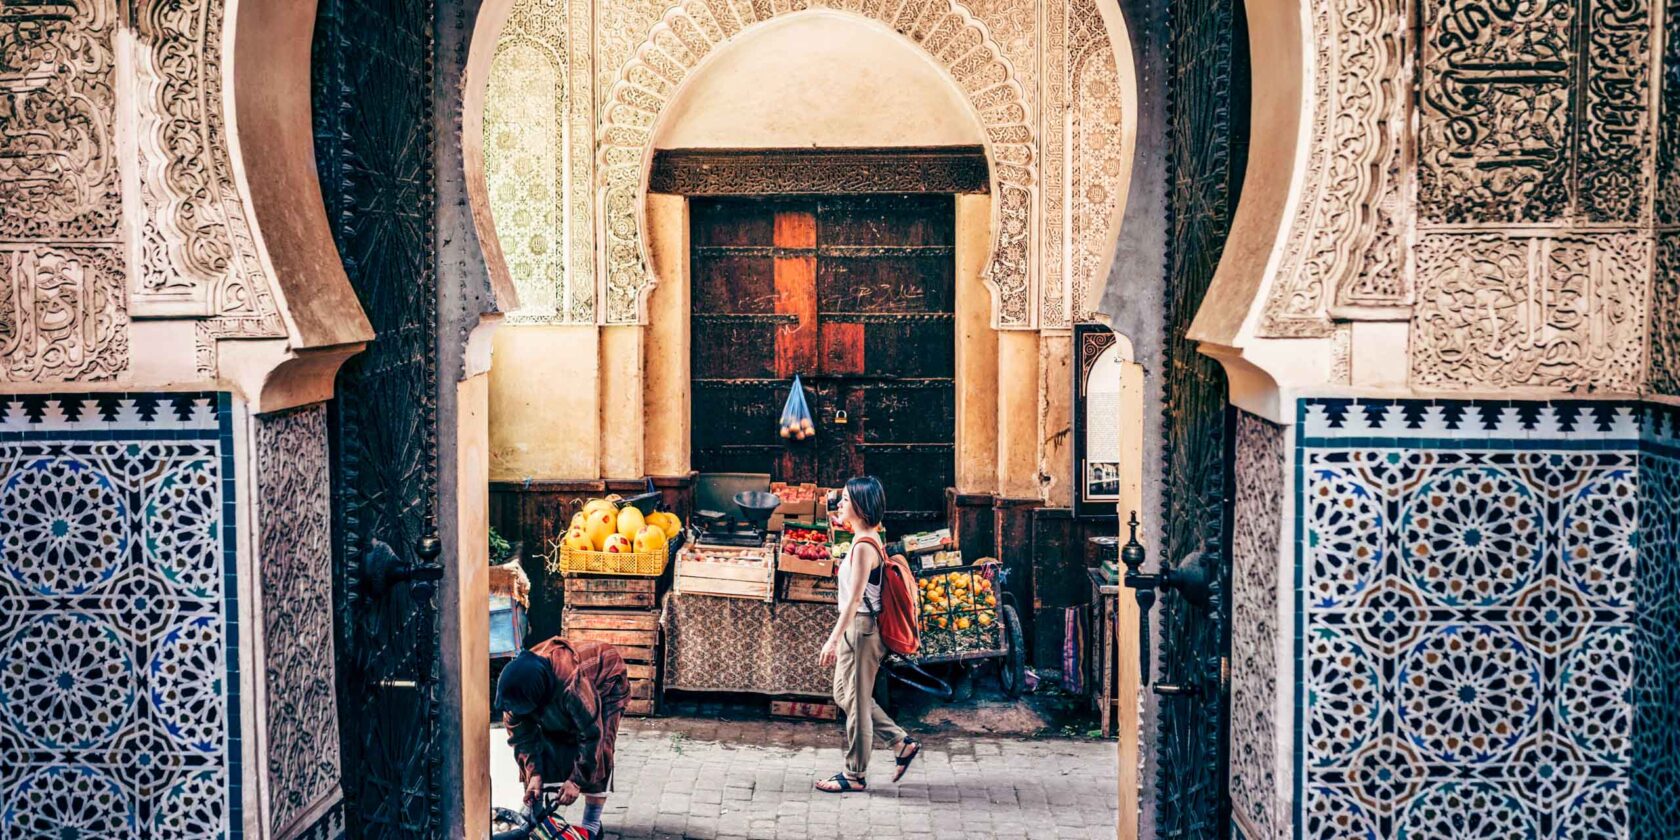 A tourist walking by a market stand.